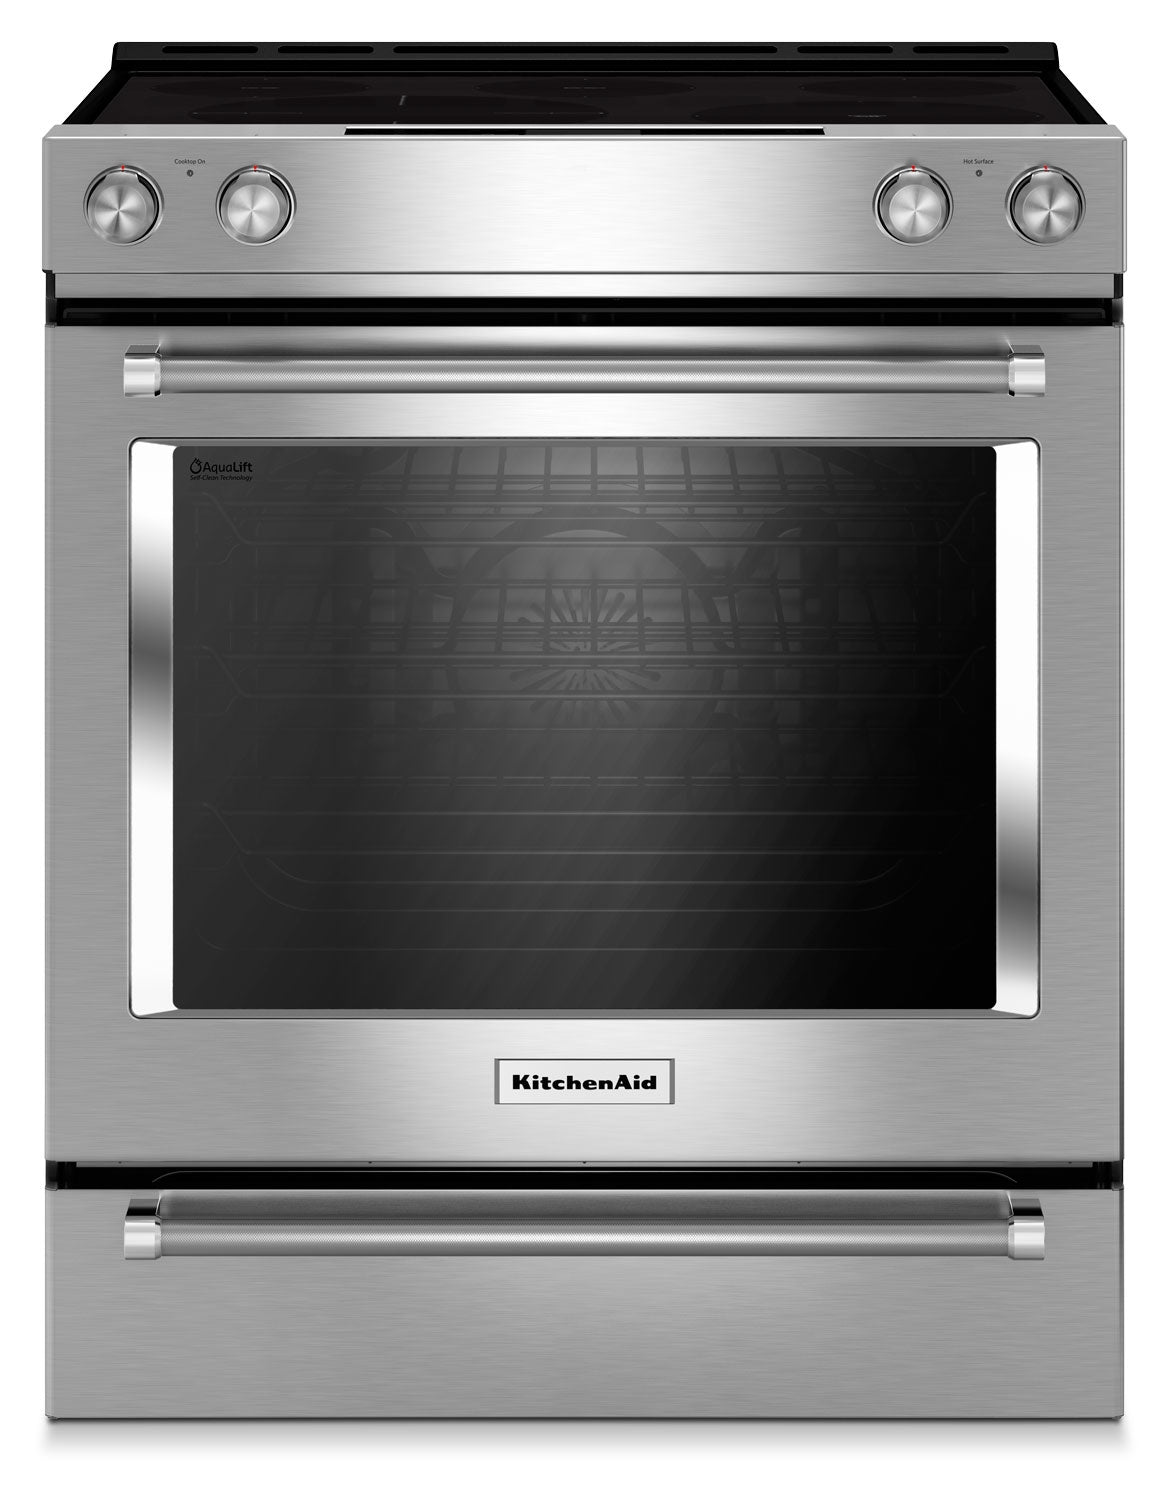 KitchenAid Stainless Steel Slide-In Electric Convection Range (7.1 Cu. Ft.) - YKSEB900ESS